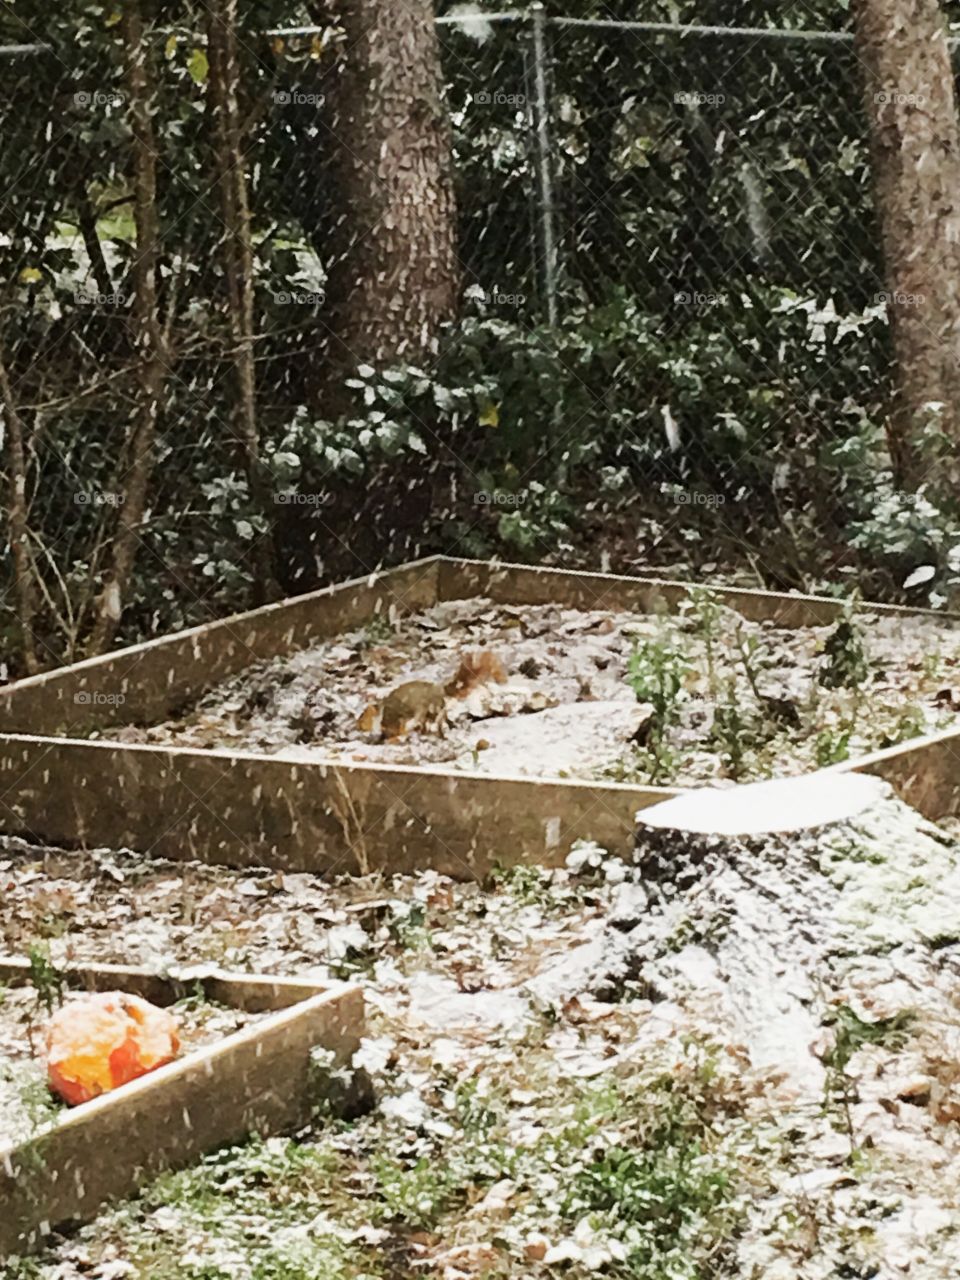 Winter is coming… The neighborhood squirrel is stocking up on compost before the winter comes and snows him in. 